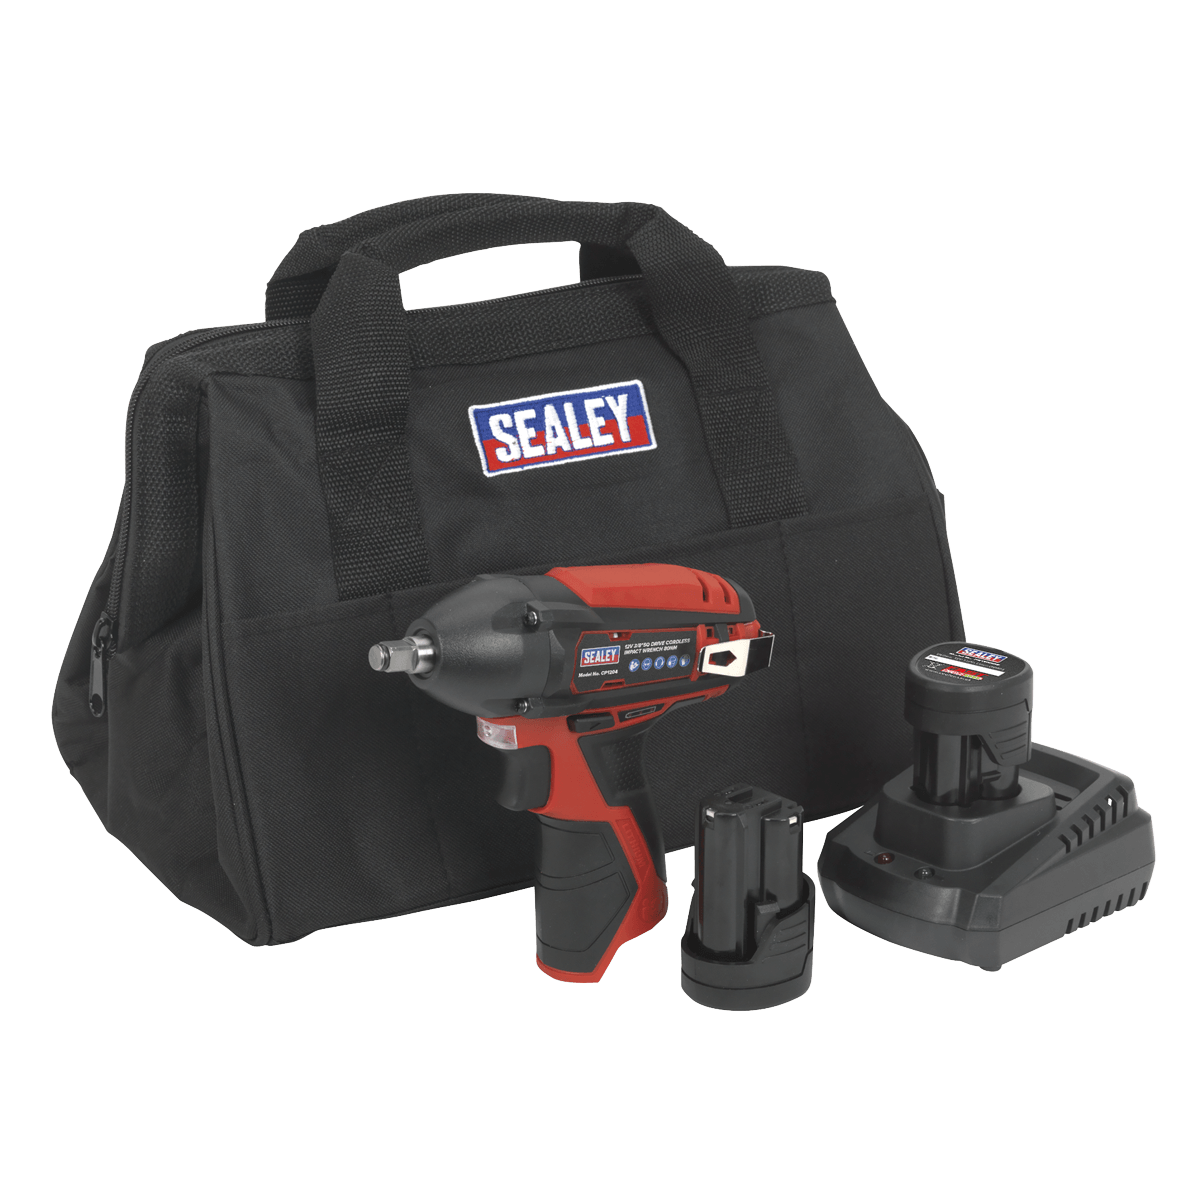 Sealey Impact Wrench Kit 3/8"Sq Drive 12V SV12 Series - 2 Batteries + charger CP1204KIT - Tools 2U Direct SW